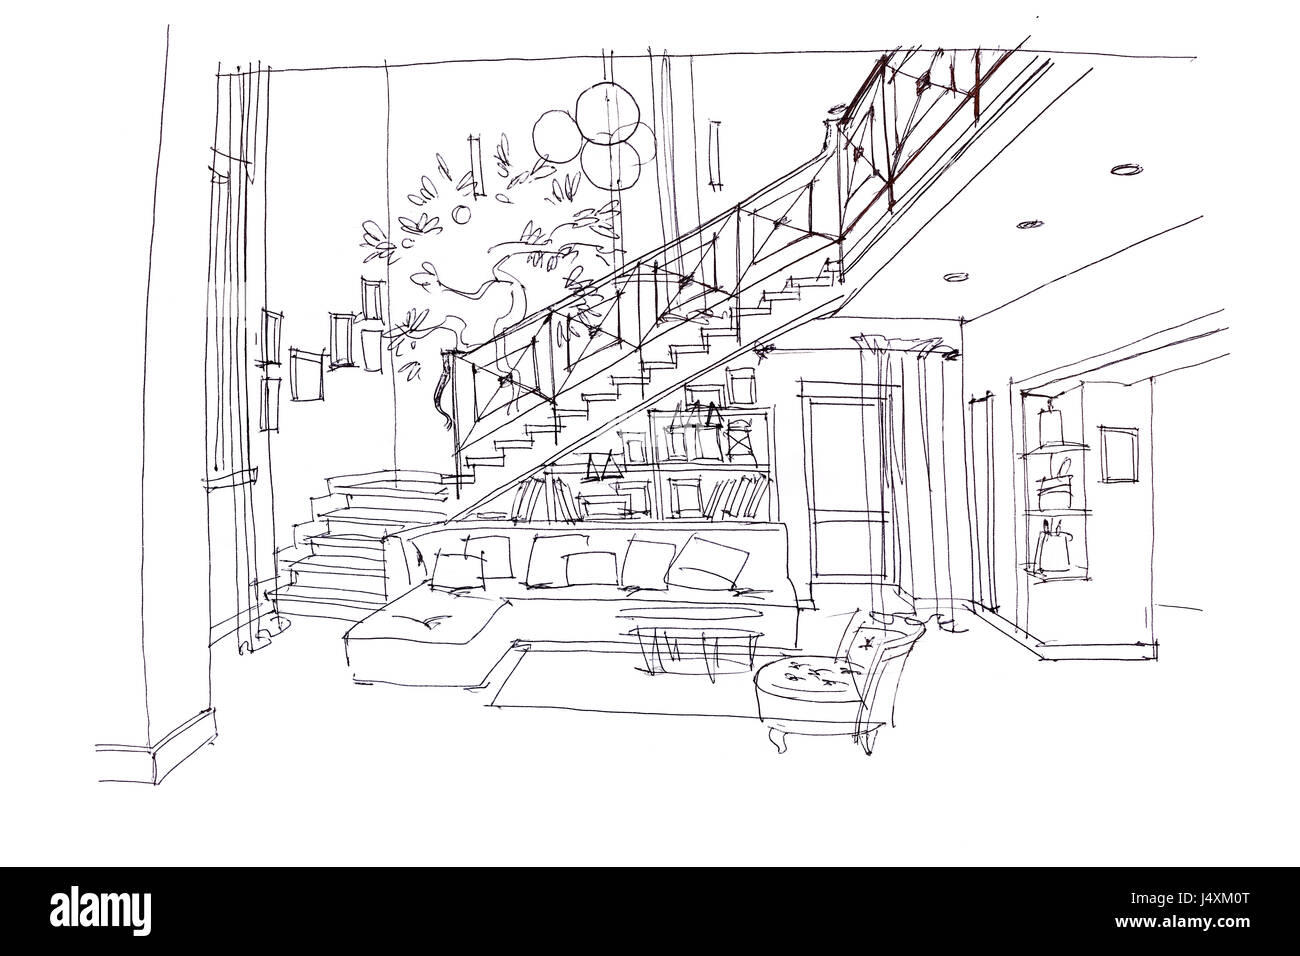 Hand drawn plan of modern living room interior and furniture Hand drawn  plan of modern living room interior with stairs and  CanStock